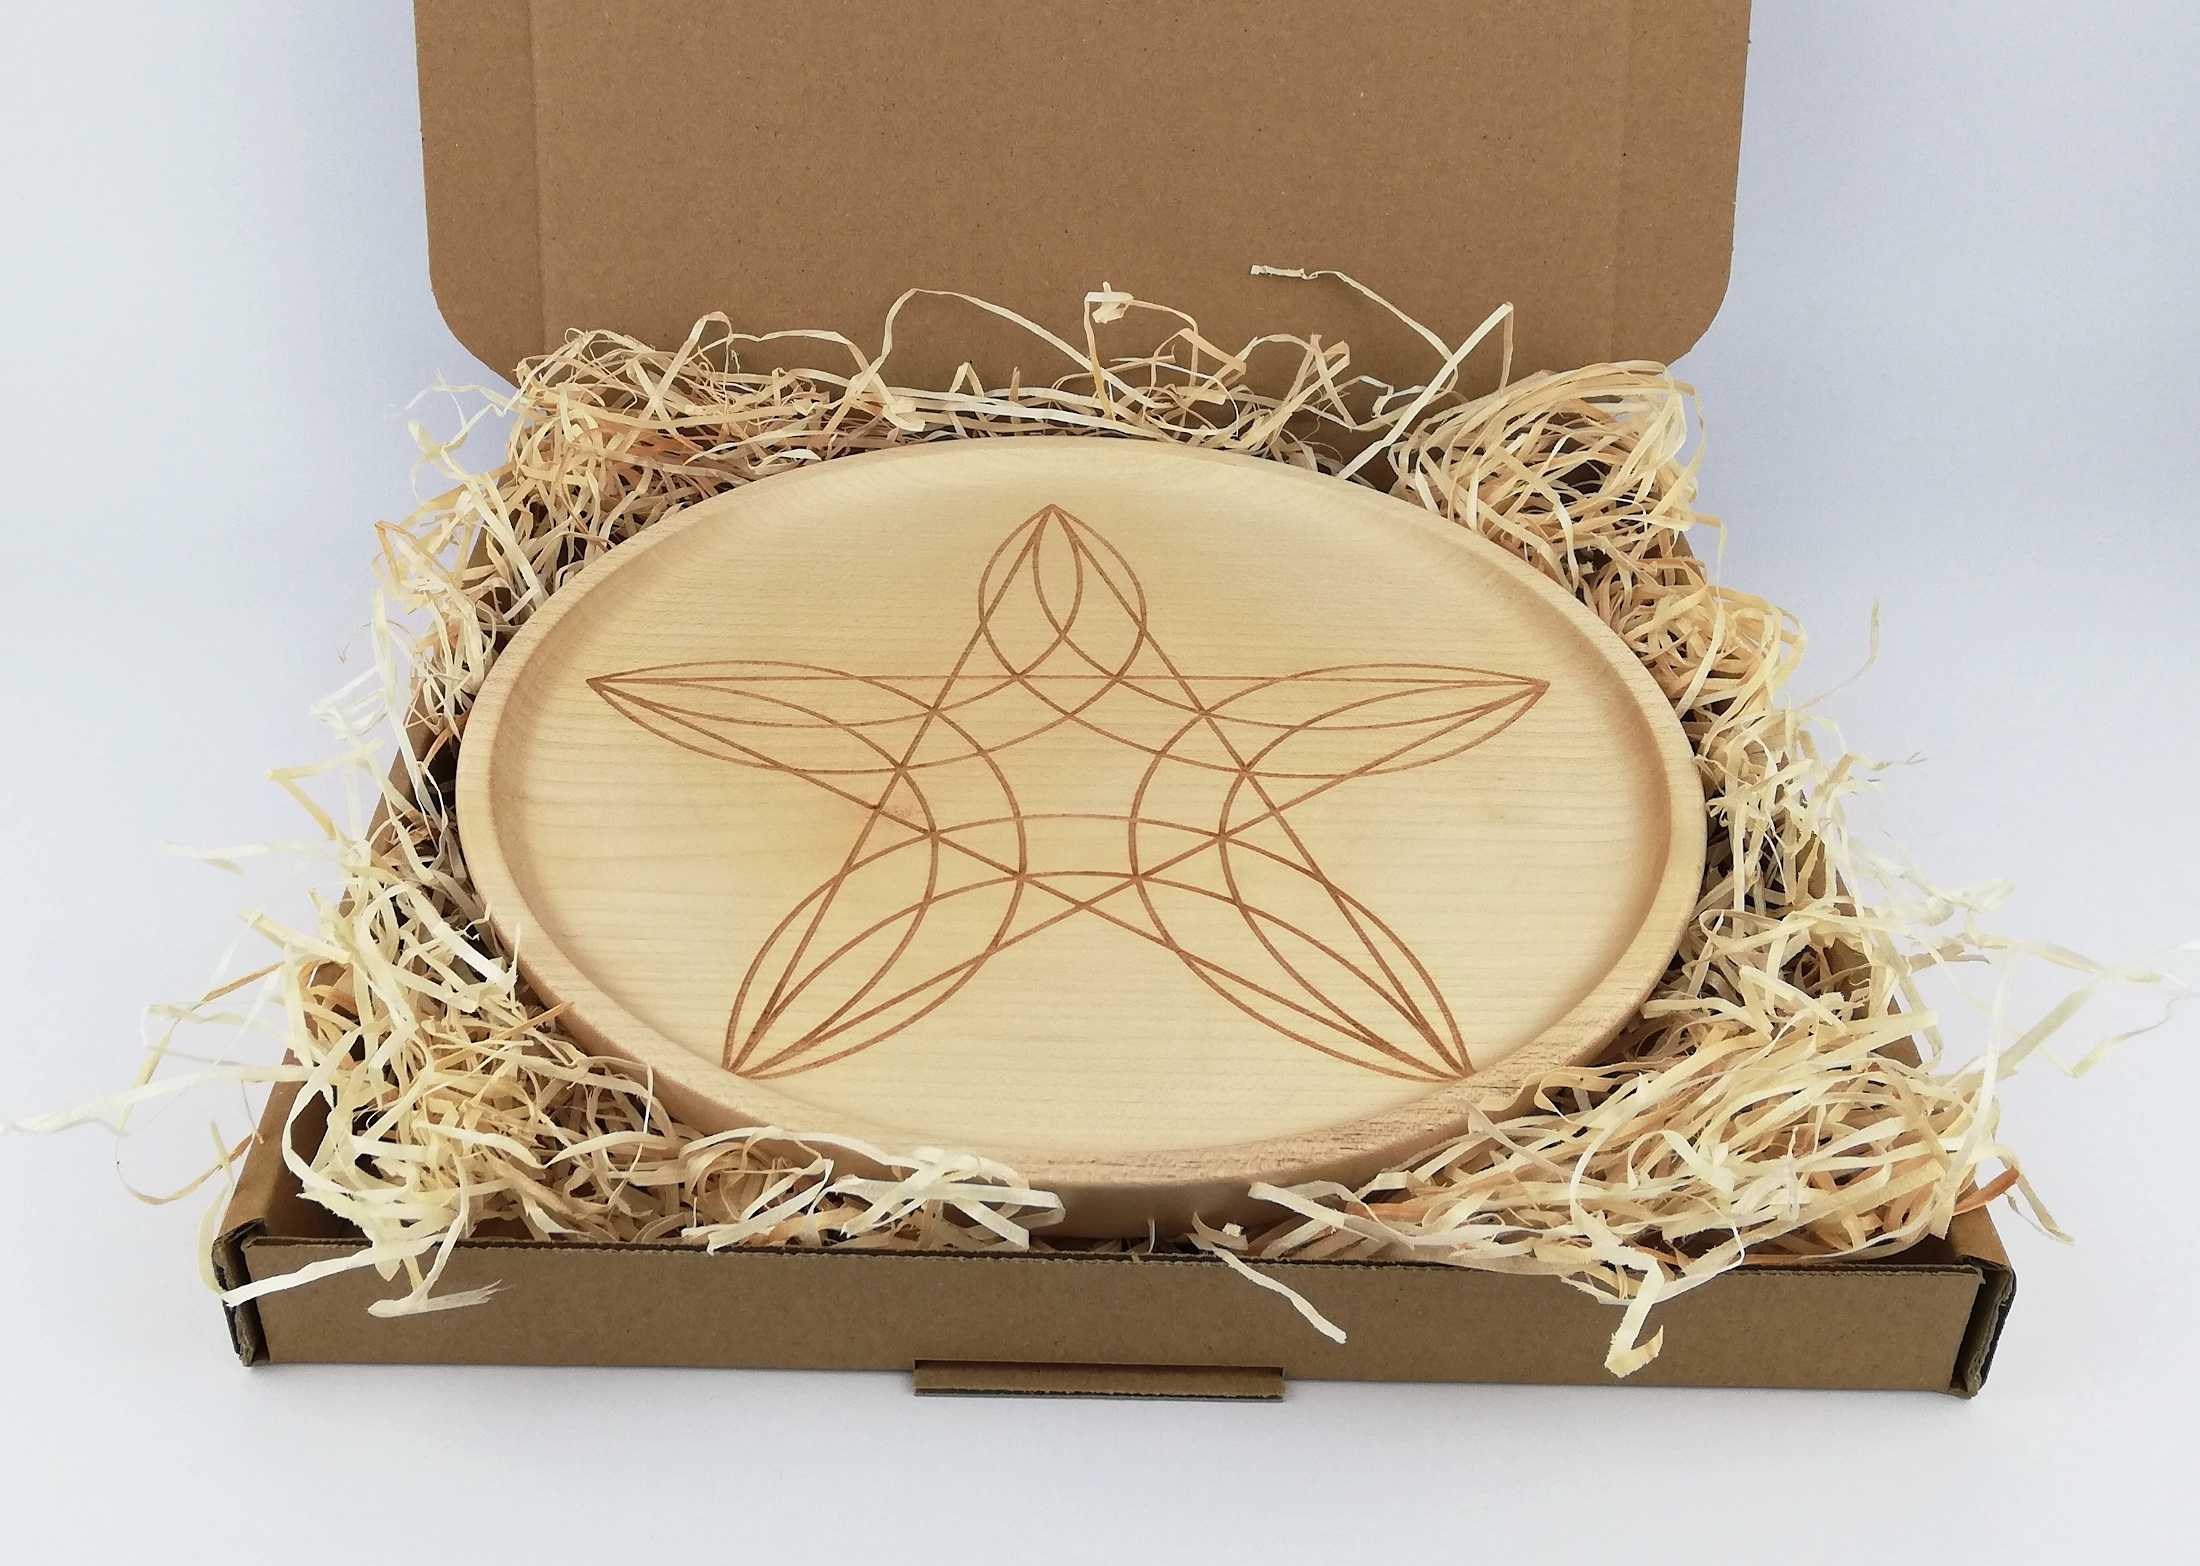 Pentagram on a middle plate (24cm/9.4inin diameter), packed in a box.